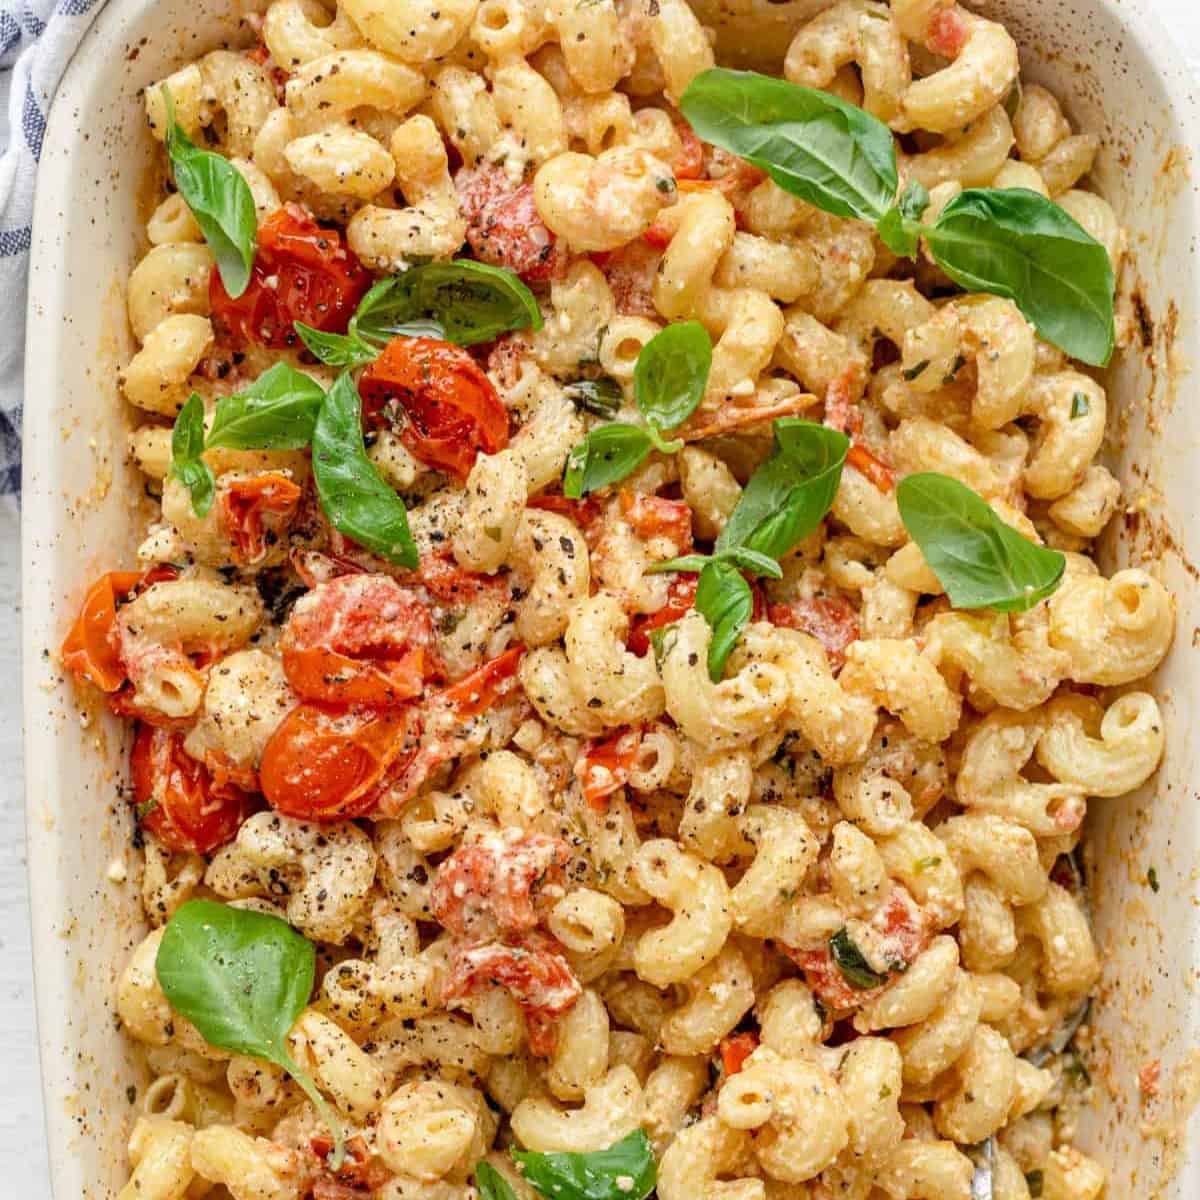 65+ Favorite Winter Recipes for Dinner - FeelGoodFoodie